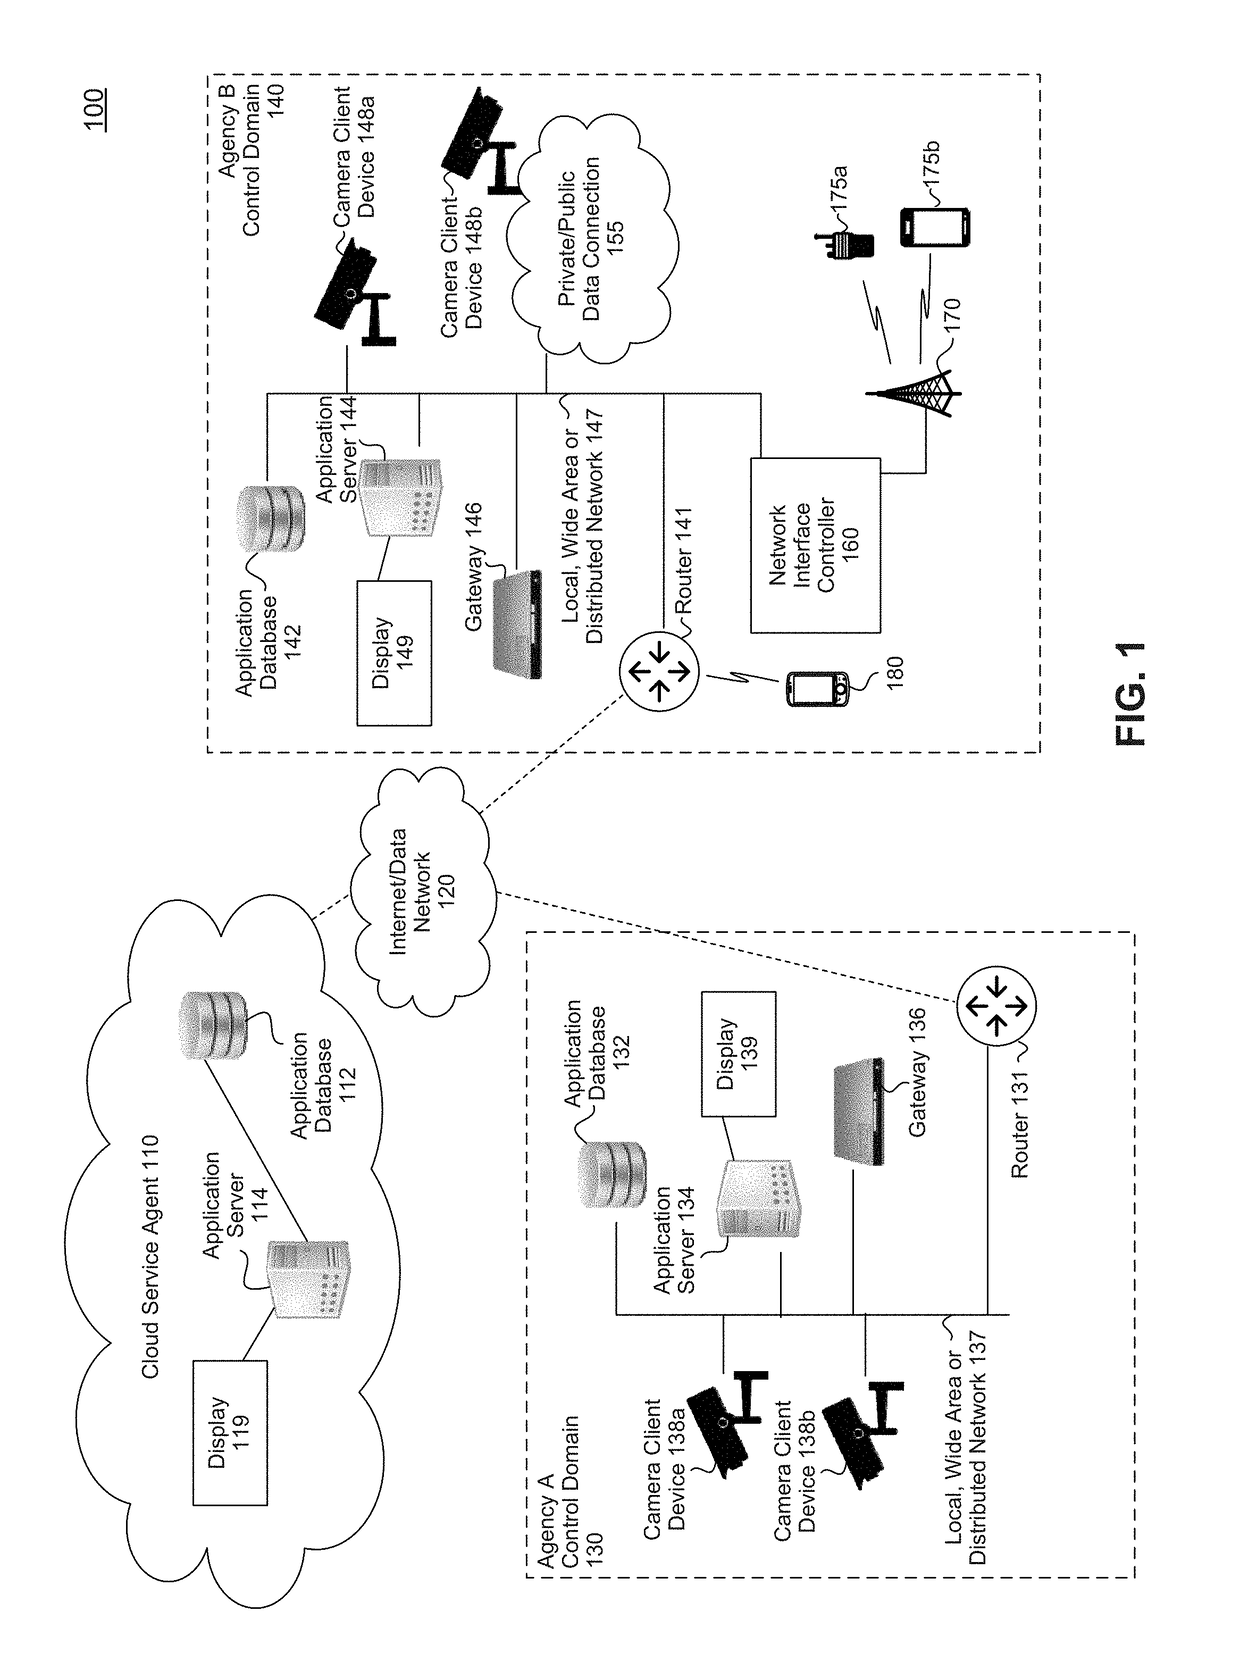 System and method for distributed intelligent pattern recognition